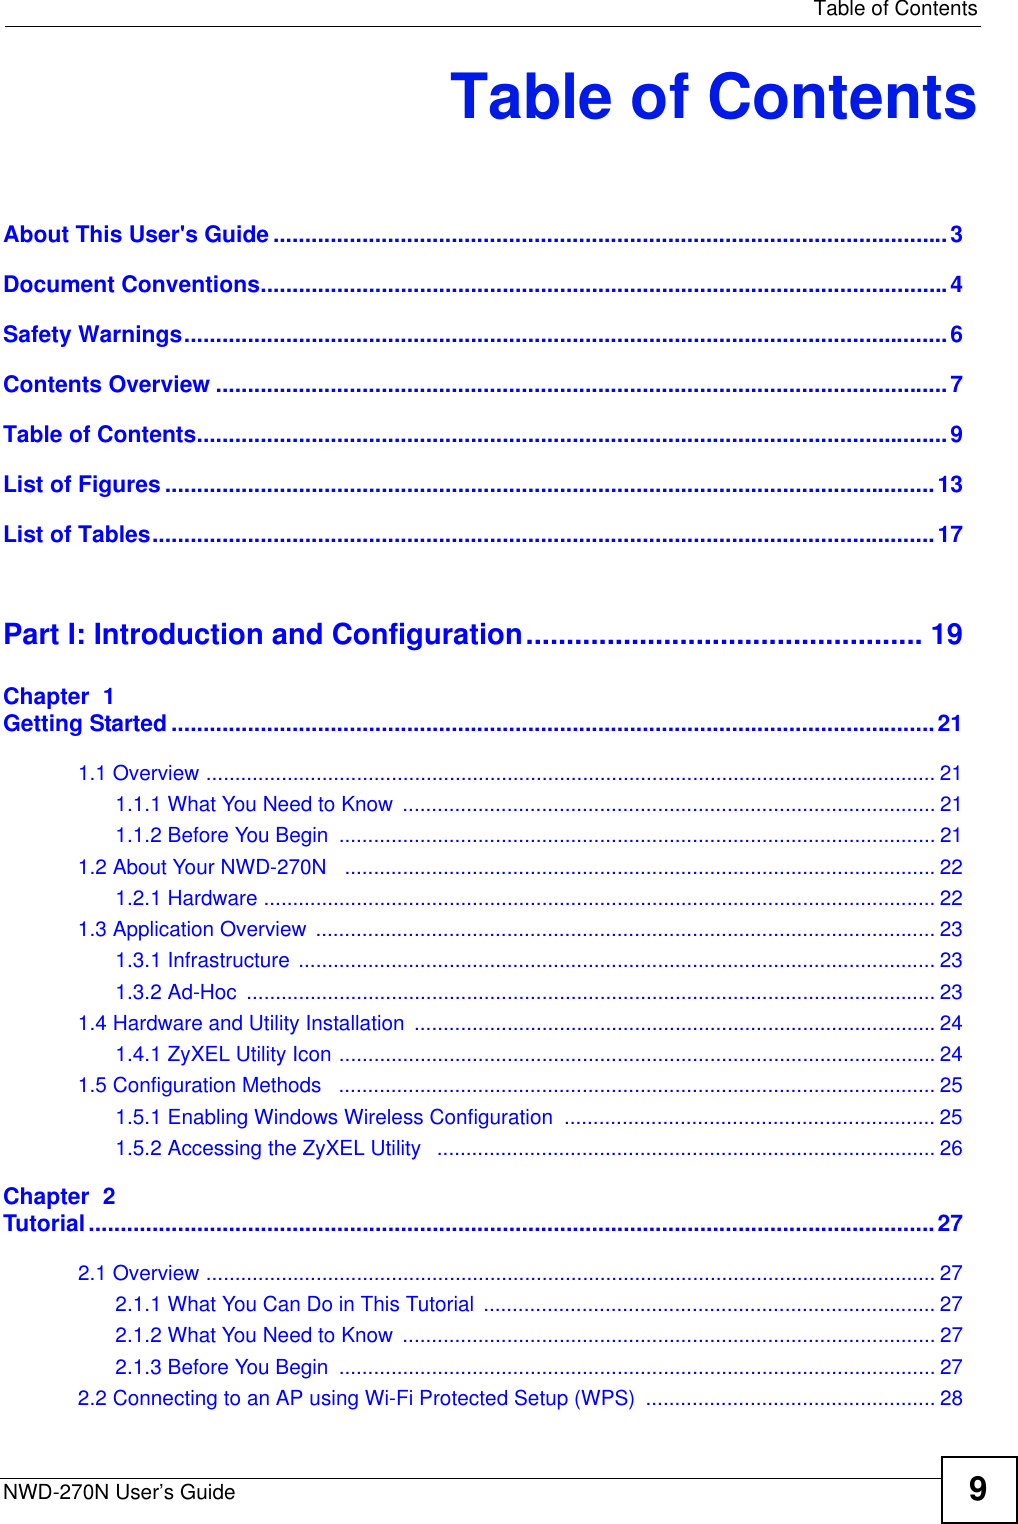   Table of ContentsNWD-270N User’s Guide 9Table of ContentsAbout This User&apos;s Guide..........................................................................................................3Document Conventions............................................................................................................4Safety Warnings........................................................................................................................6Contents Overview ...................................................................................................................7Table of Contents......................................................................................................................9List of Figures .........................................................................................................................13List of Tables...........................................................................................................................17Part I: Introduction and Configuration................................................. 19Chapter  1Getting Started........................................................................................................................211.1 Overview .............................................................................................................................. 211.1.1 What You Need to Know  ............................................................................................ 211.1.2 Before You Begin  ....................................................................................................... 211.2 About Your NWD-270N   ......................................................................................................221.2.1 Hardware .................................................................................................................... 221.3 Application Overview  ........................................................................................................... 231.3.1 Infrastructure .............................................................................................................. 231.3.2 Ad-Hoc  ....................................................................................................................... 231.4 Hardware and Utility Installation  ..........................................................................................241.4.1 ZyXEL Utility Icon .......................................................................................................241.5 Configuration Methods   ....................................................................................................... 251.5.1 Enabling Windows Wireless Configuration  ................................................................ 251.5.2 Accessing the ZyXEL Utility   ...................................................................................... 26Chapter  2Tutorial.....................................................................................................................................272.1 Overview .............................................................................................................................. 272.1.1 What You Can Do in This Tutorial .............................................................................. 272.1.2 What You Need to Know  ............................................................................................ 272.1.3 Before You Begin  ....................................................................................................... 272.2 Connecting to an AP using Wi-Fi Protected Setup (WPS)  .................................................. 28